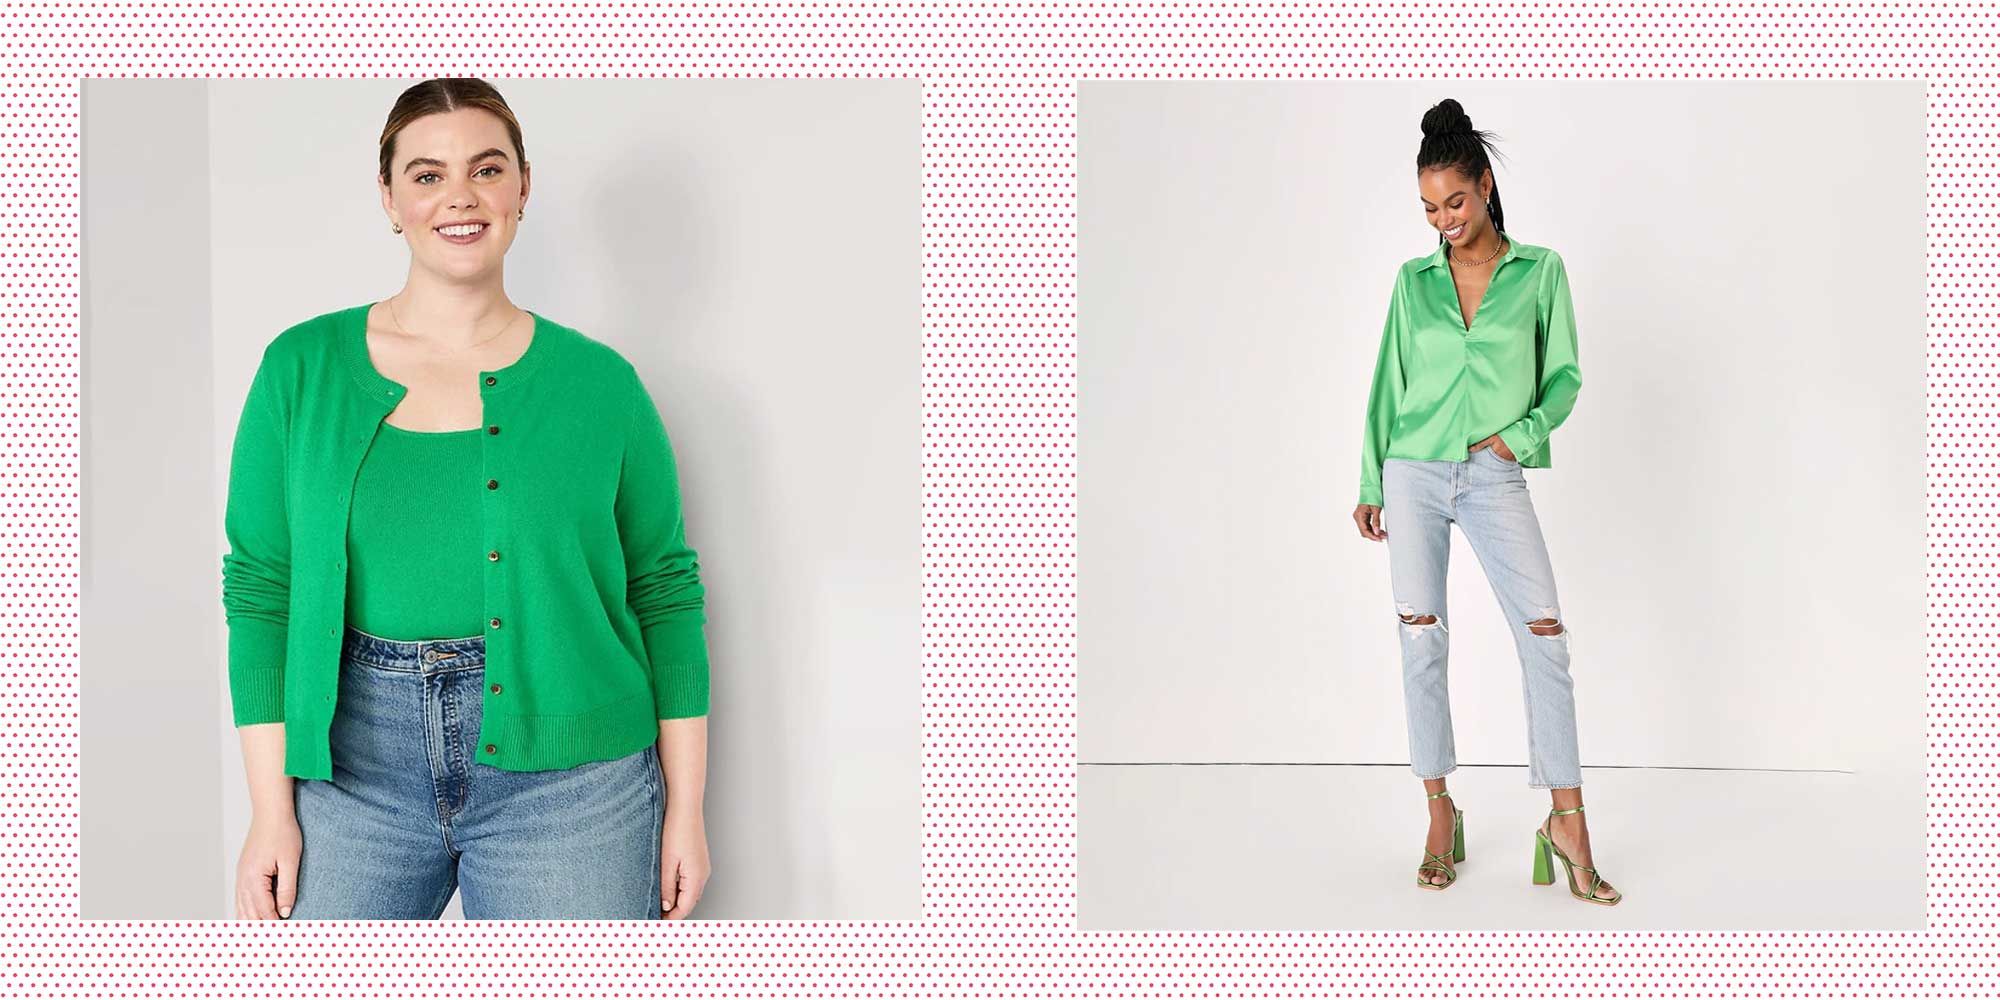 25 St. Patrick's Day Outfit Ideas - Green Outfits for St. Paddy's